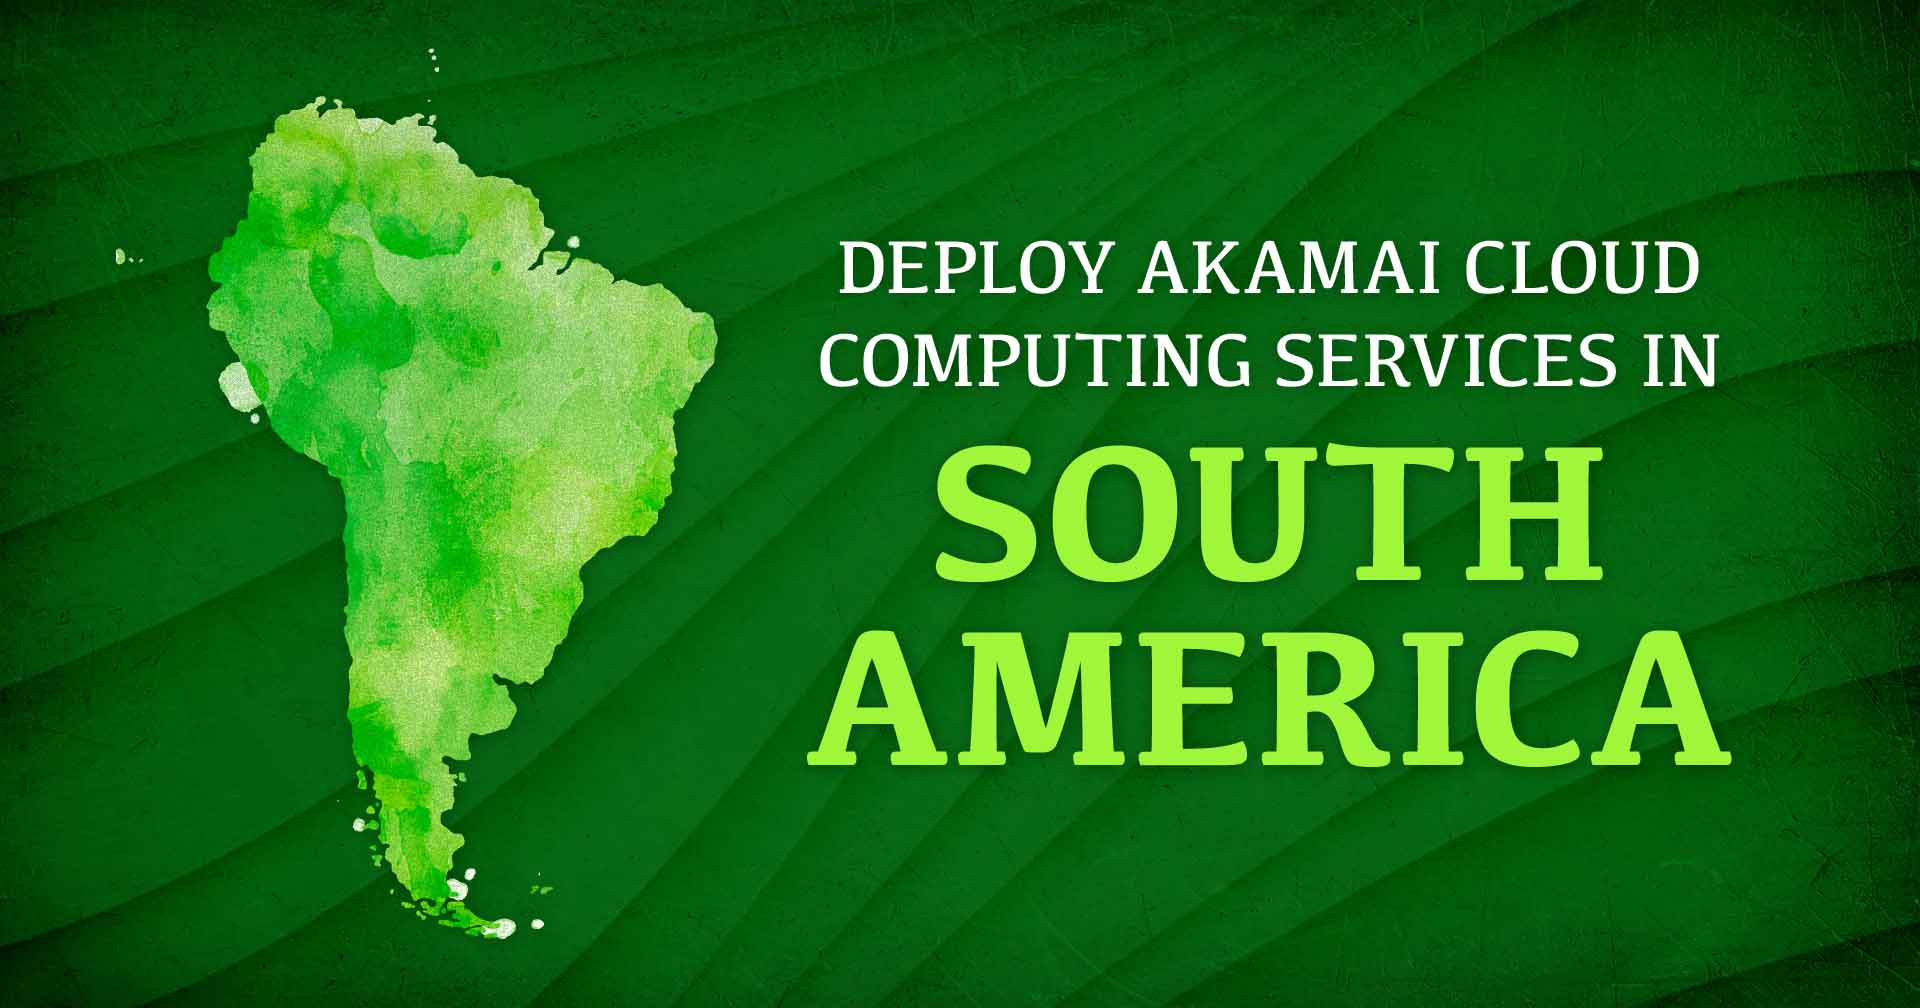 Image representation of South America next to the text Deploy Akamai Cloud Computing Services in South America.